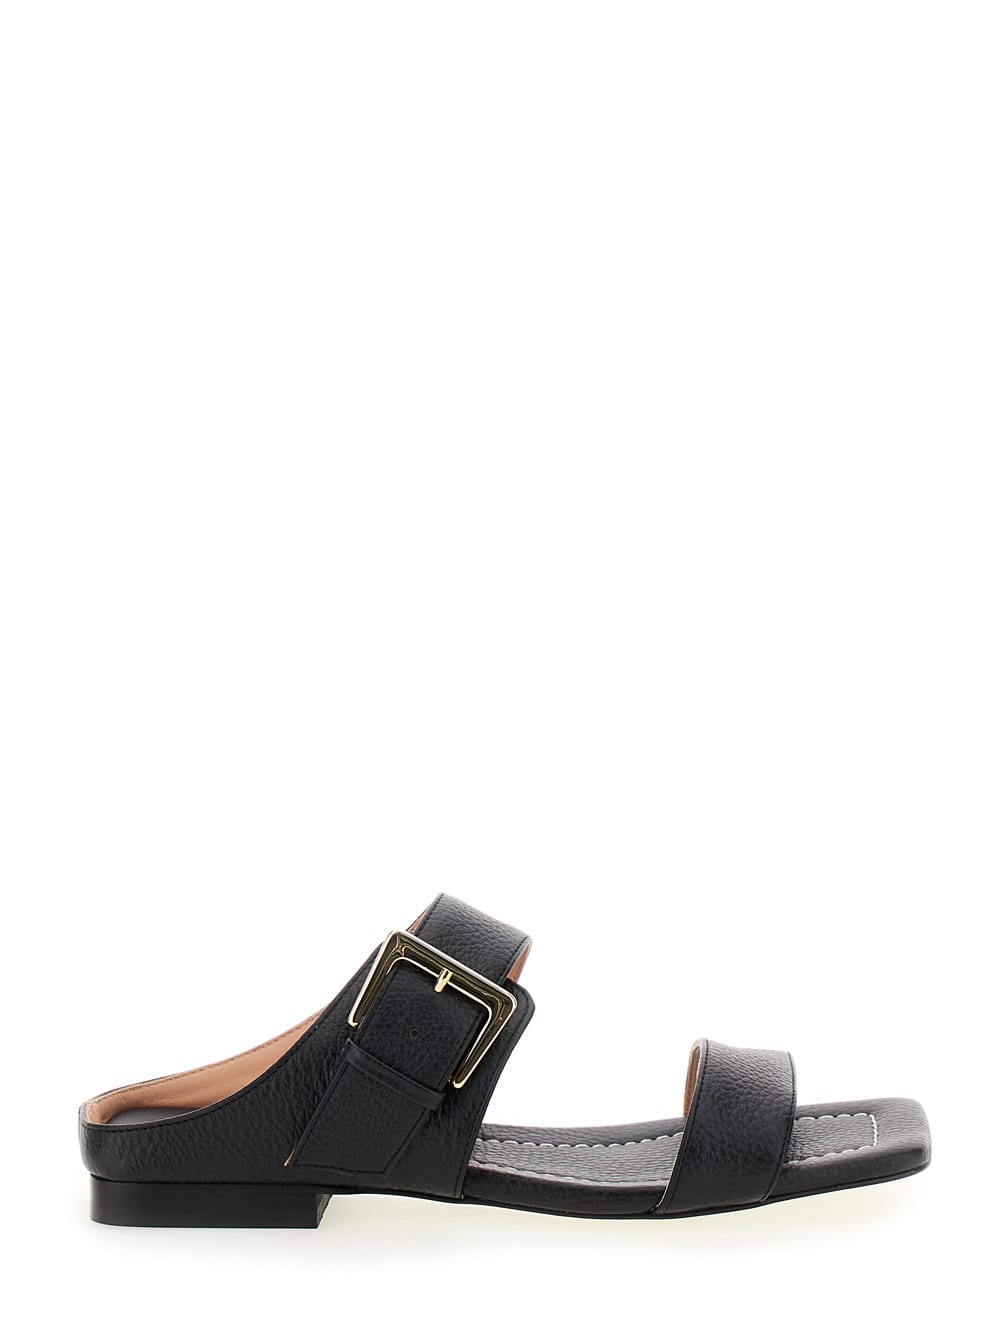 Black Sandals With Maxi Buckle In Leather Woman